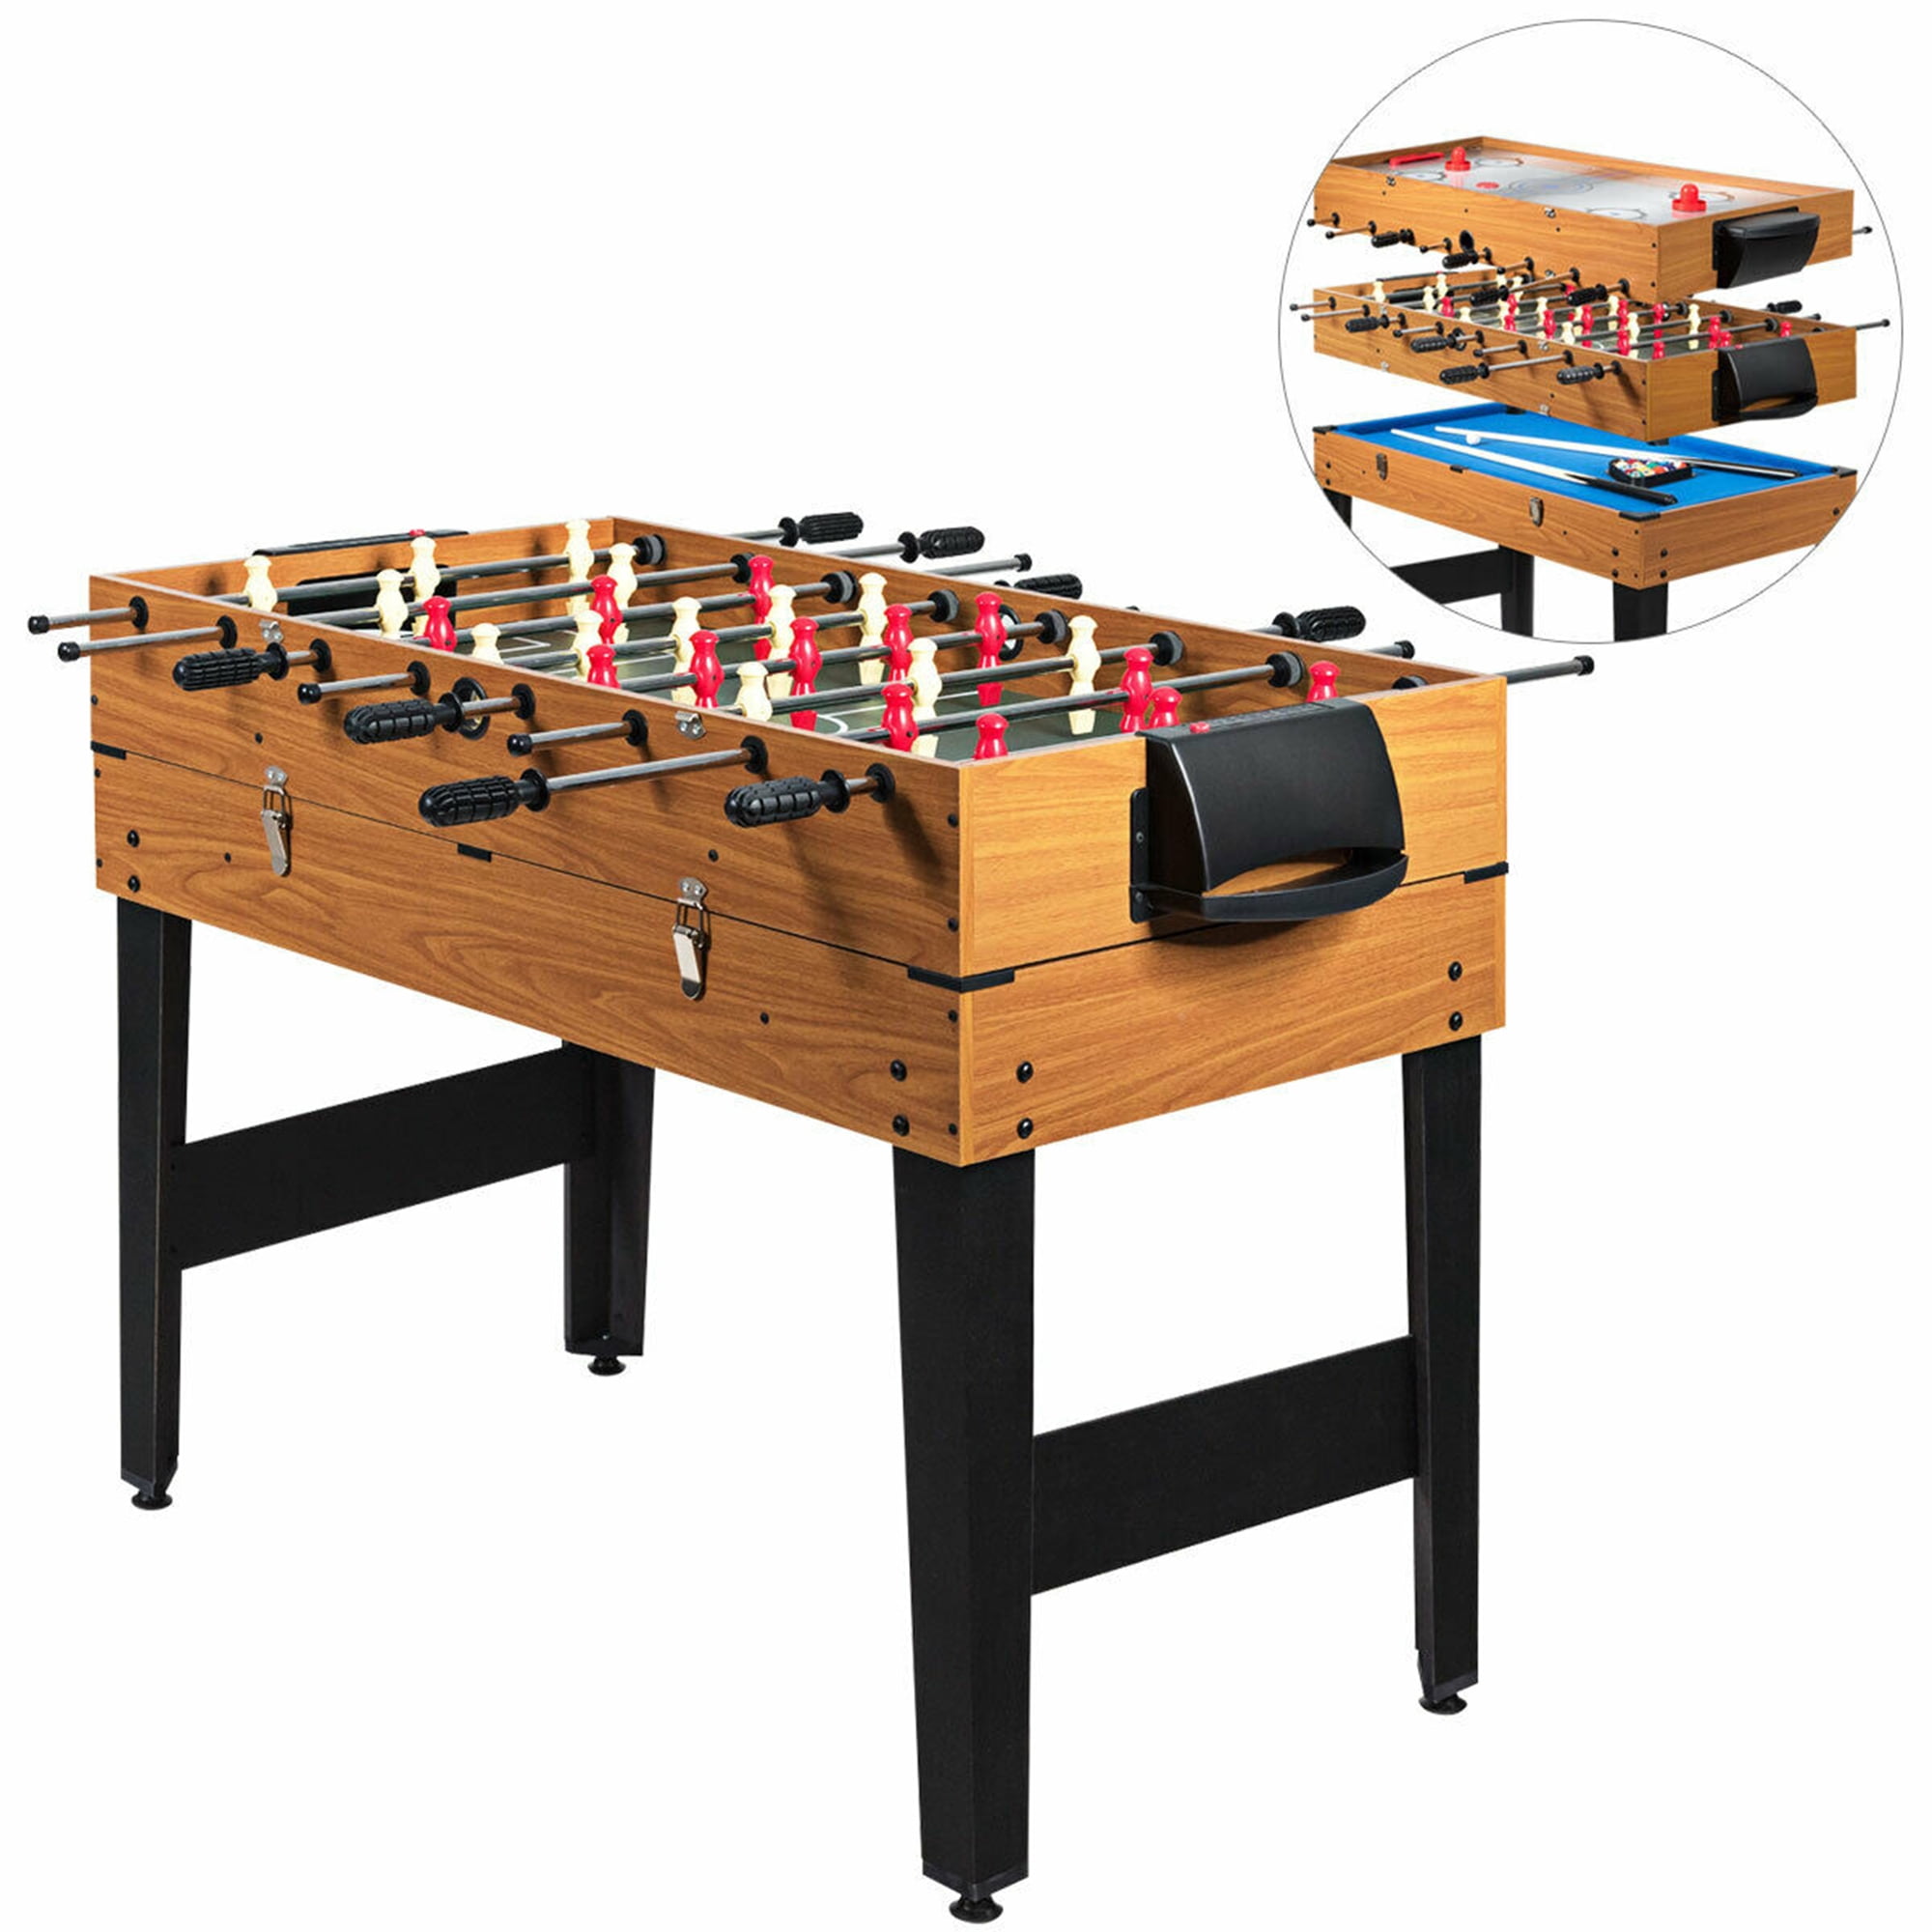 37" Home Foosball Table Competition Game Soccer Arcade Football Sports Game Desk 